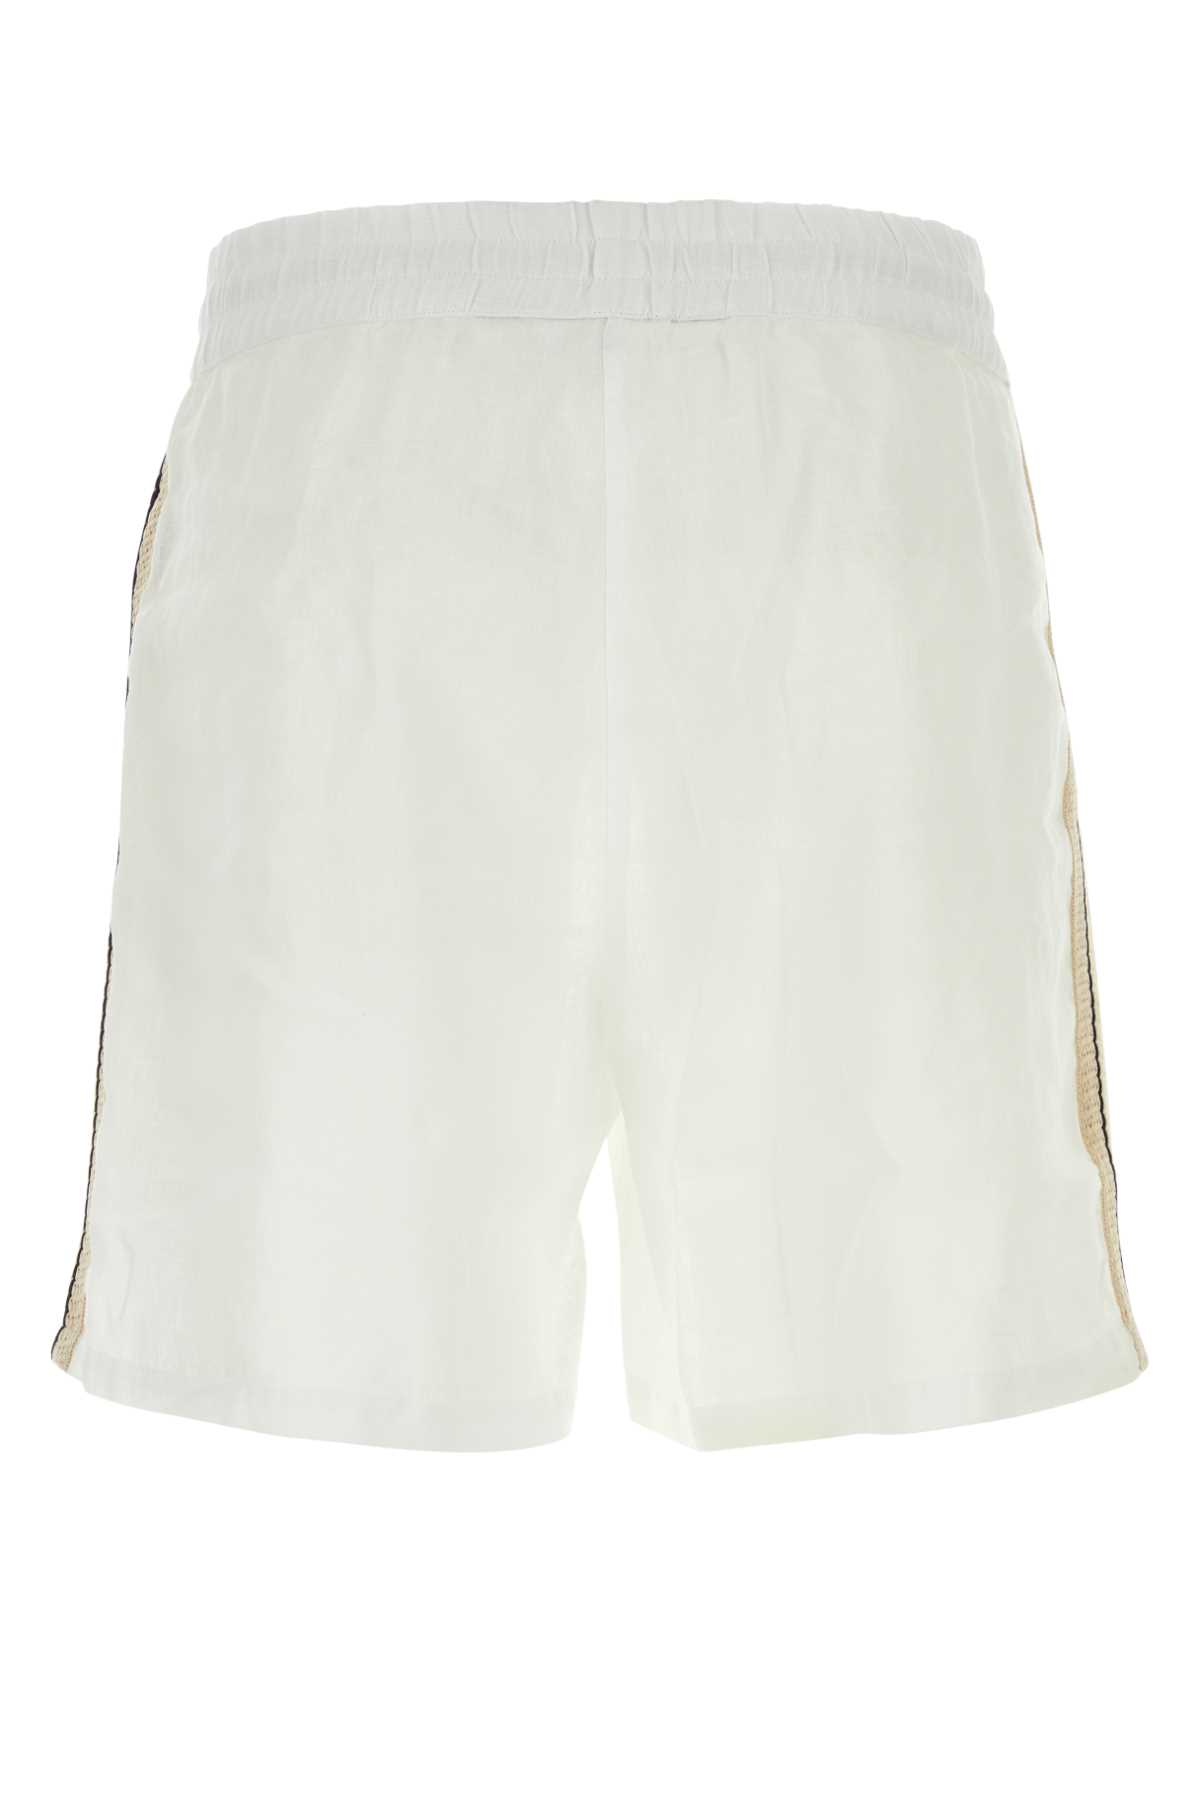 Palm Angels White Linen Bermuda Shorts In Offwhite